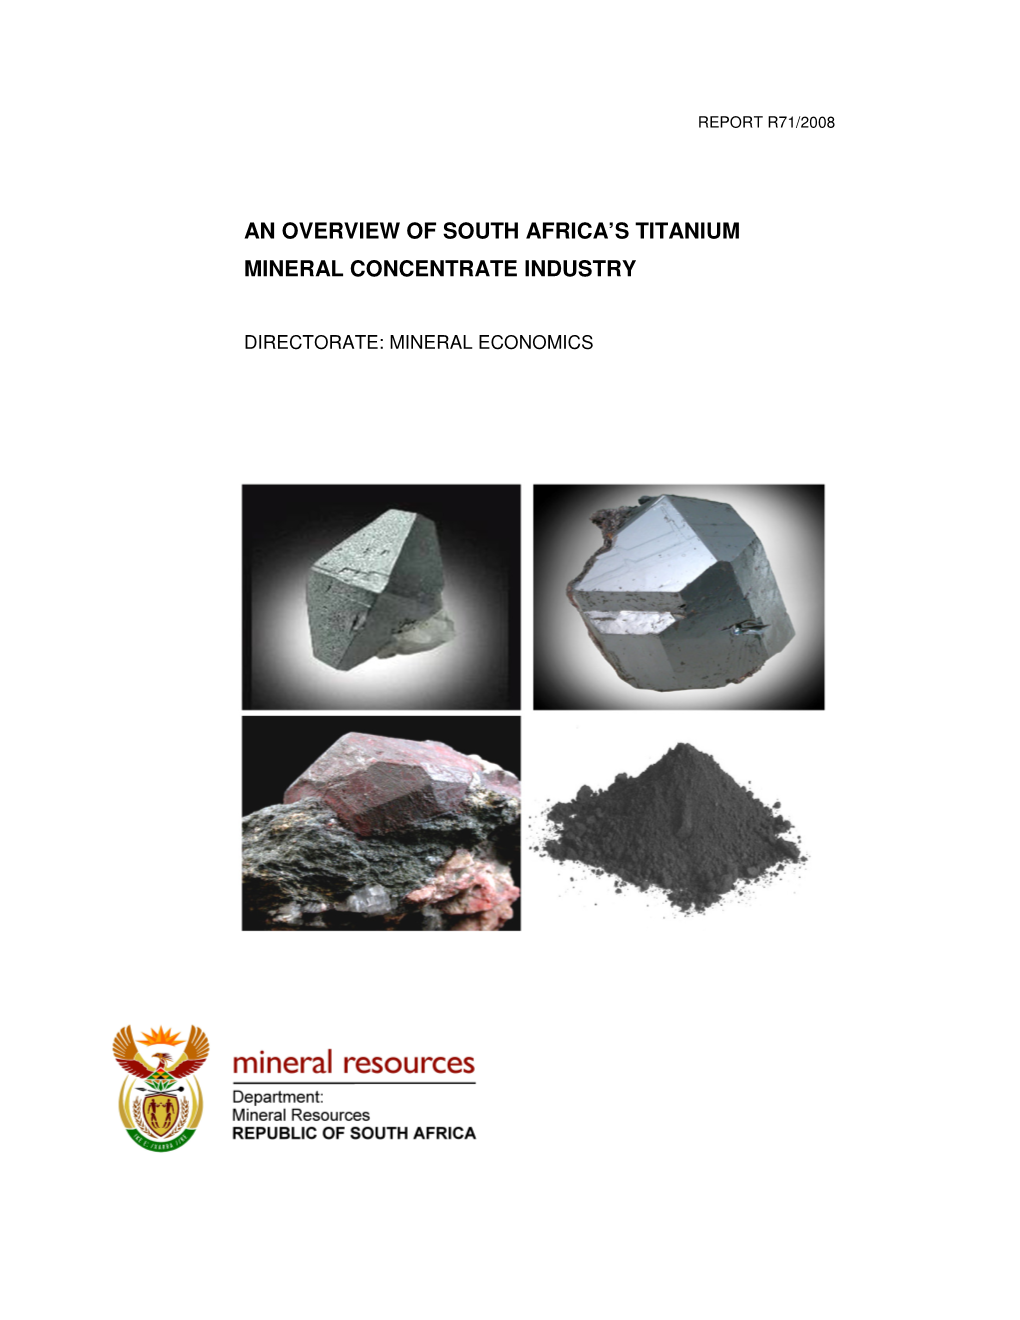 An Overview of South Africa's Titanium Mineral